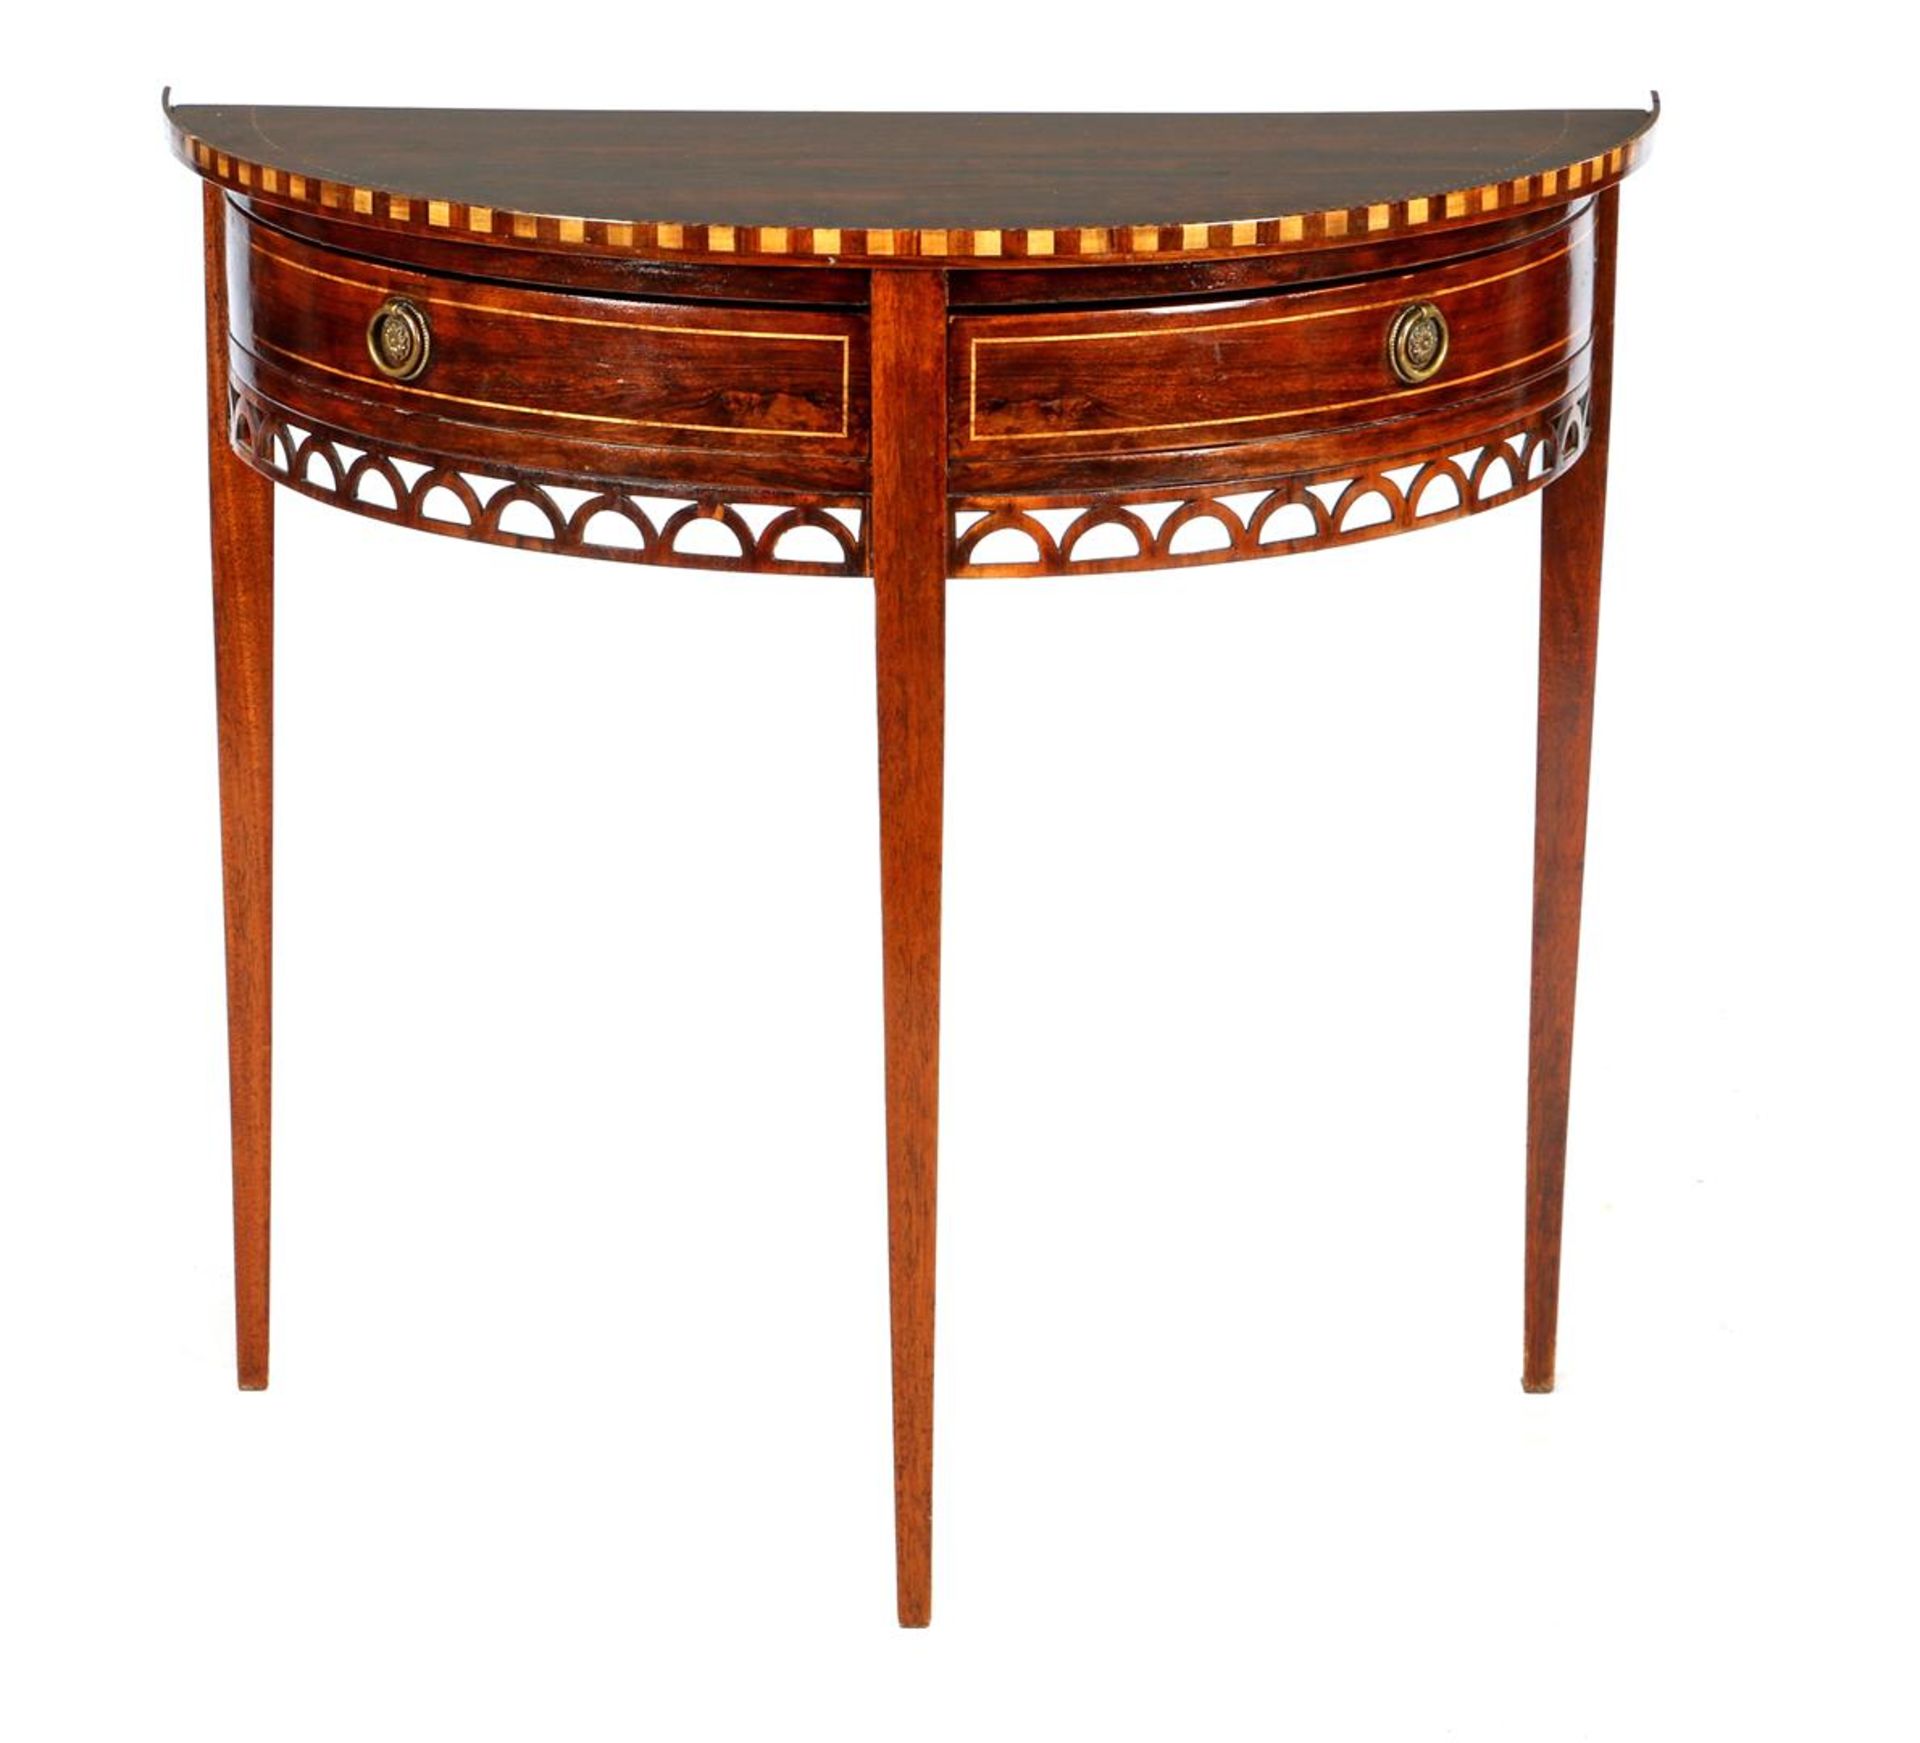 Mahogany Louis Seize style demi lune table with marquetry trim